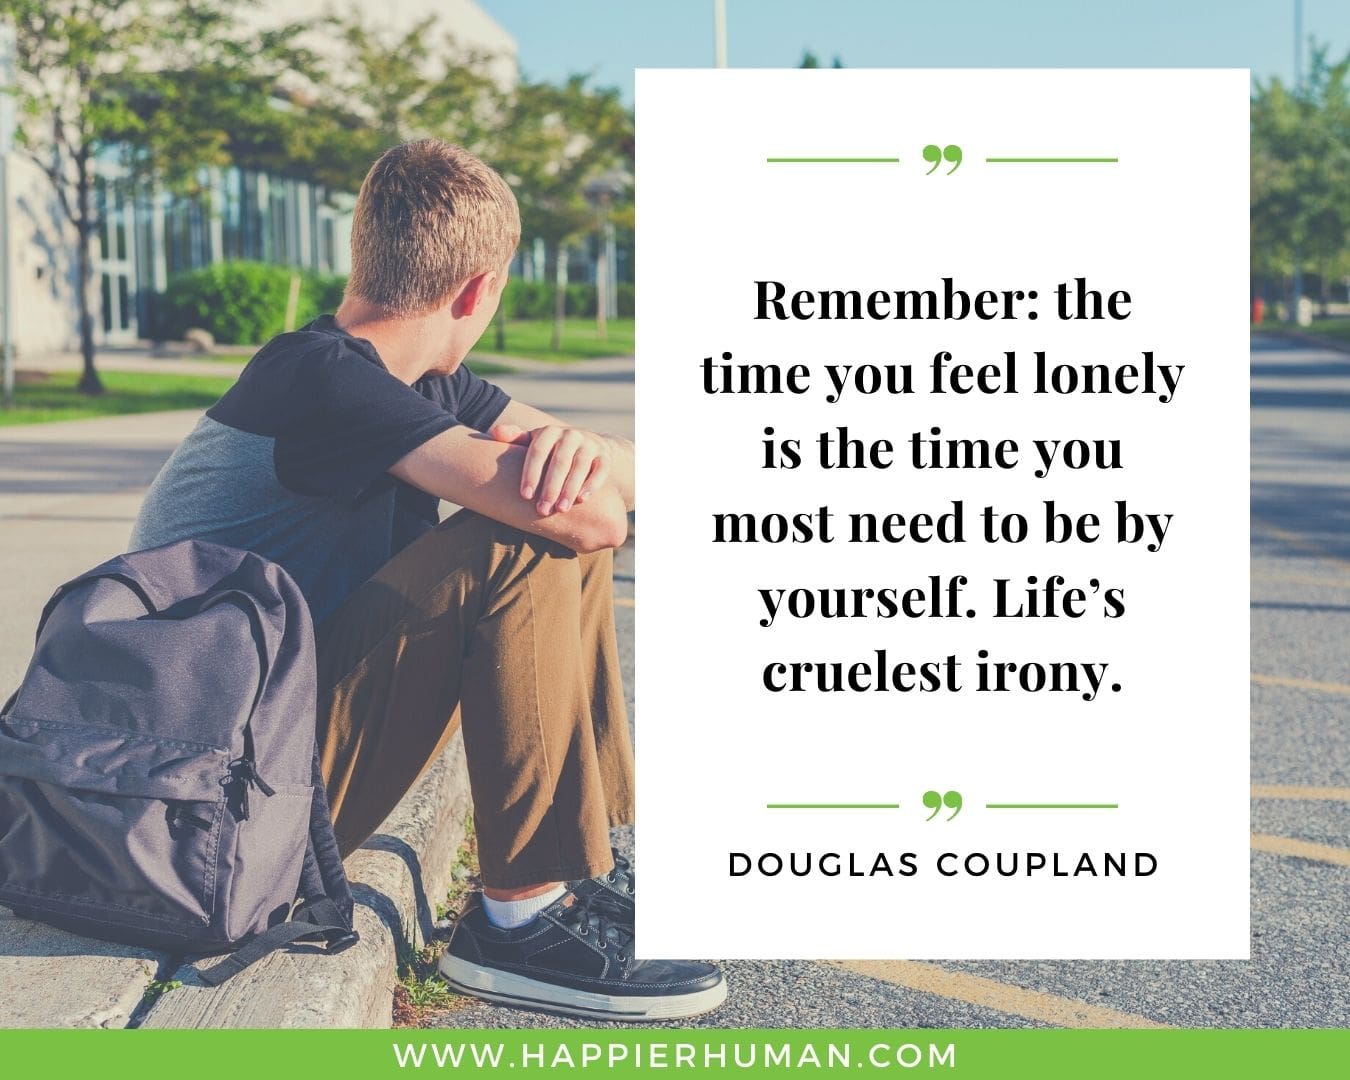 Loneliness Quotes - “Remember: the time you feel lonely is the time you most need to be by yourself. Life’s cruelest irony.”– Douglas Coupland